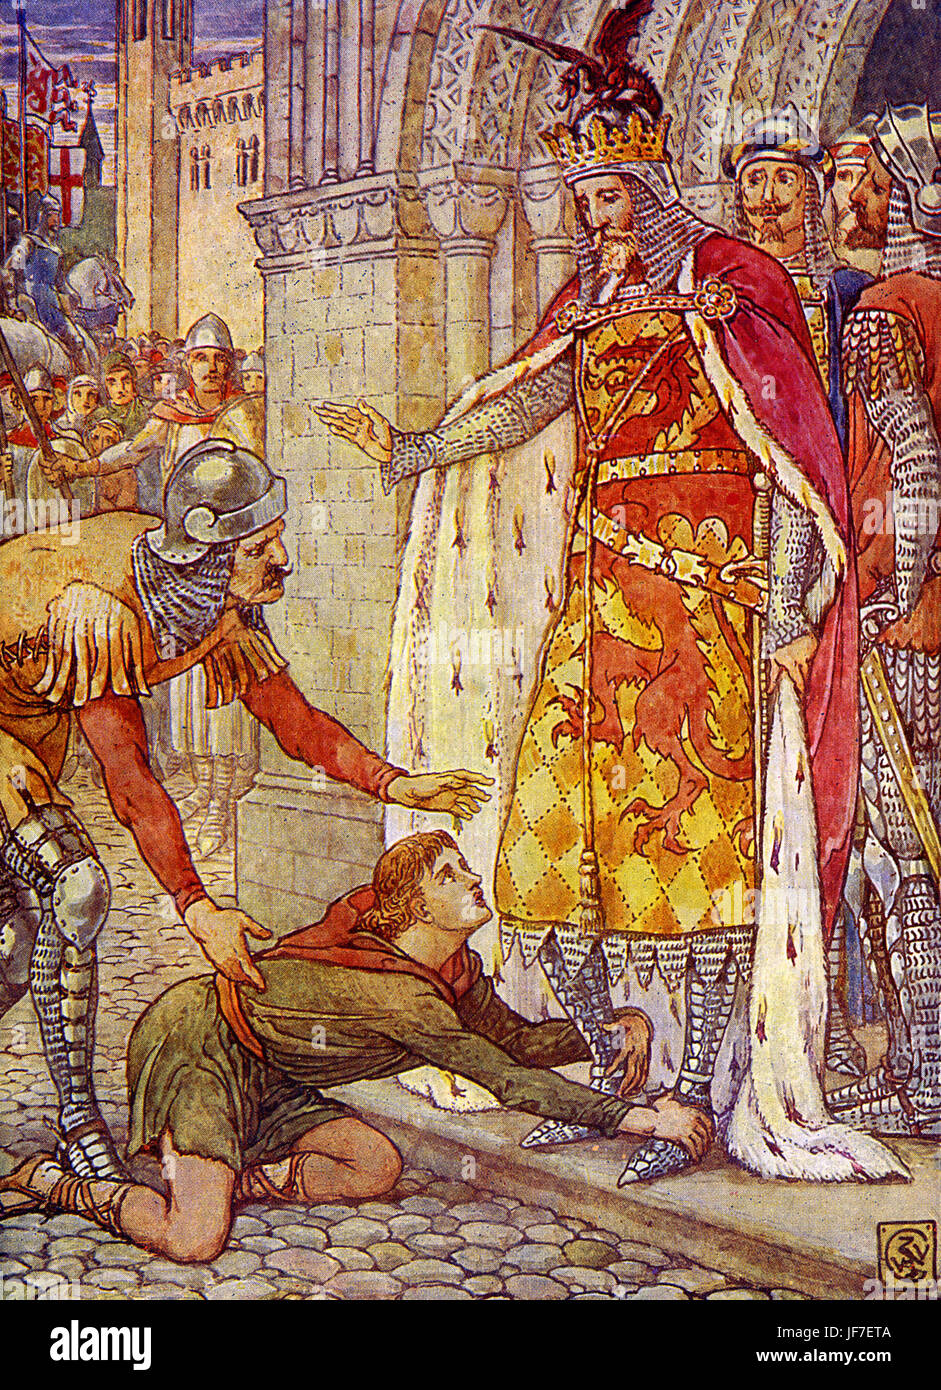 King Arthur's Knights by Henry Gilbert. 'Young Owen appeals to the King'. Illustration by Walter Crane, circa 1911.WC: English artist of Arts and Crafts movement, 15 August 1845 - 14 March 1915. Stock Photo